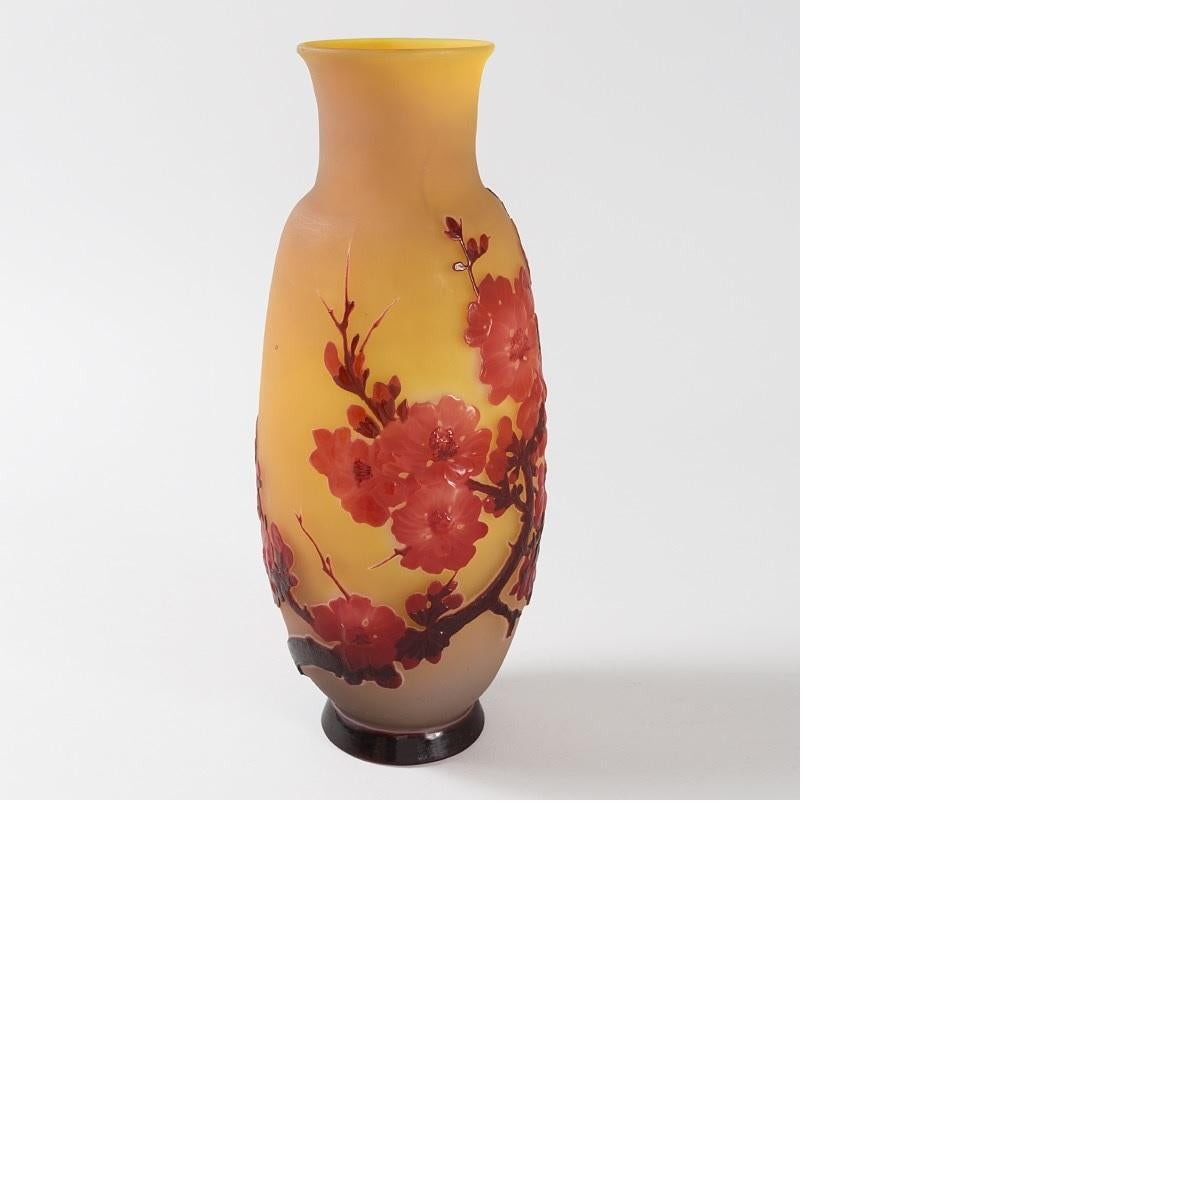 A French Art Nouveau 'Fleurs de pommier' cameo glass vase by Émile Gallé. This ovular vase features crimson leaves and crisp red apple blossoms on a gold ground. The flora are rendered in slightly translucent glass, which makes a remarkable contrast